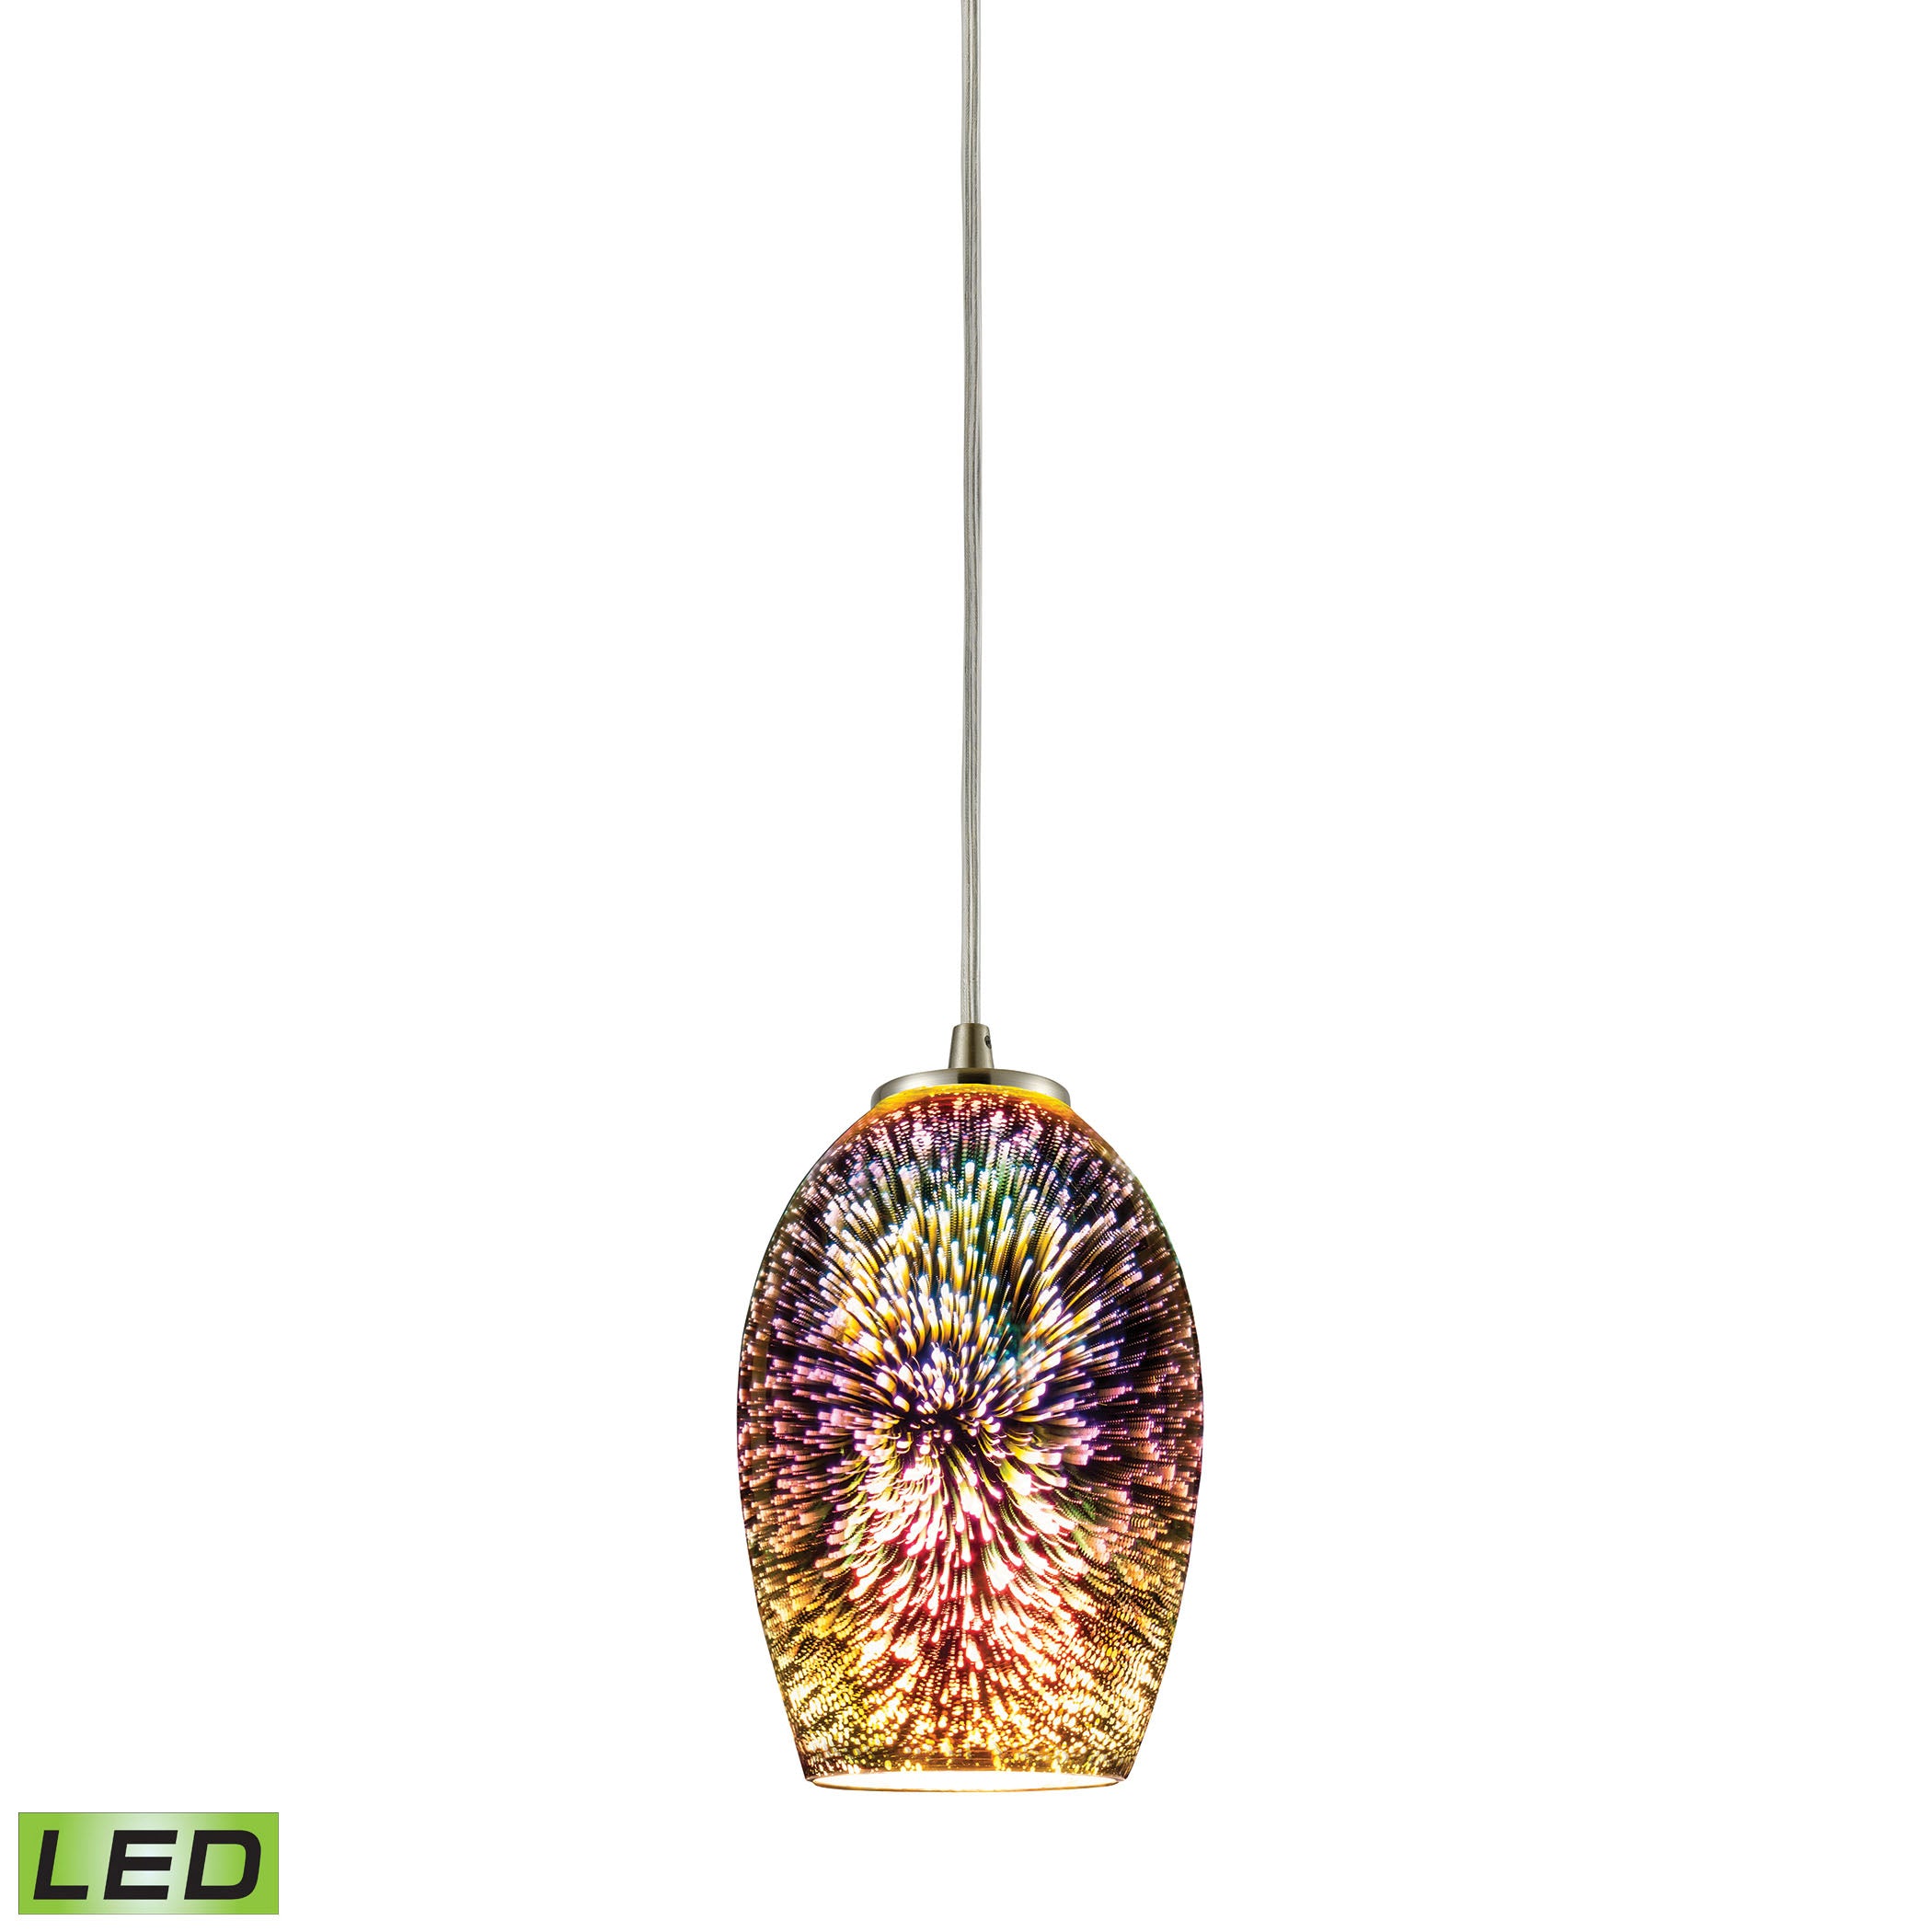 ELK Lighting 10506/1-LED Illusions 1-Light Mini Pendant in Satin Nickel with Fireworks Glass - Includes LED Bulb